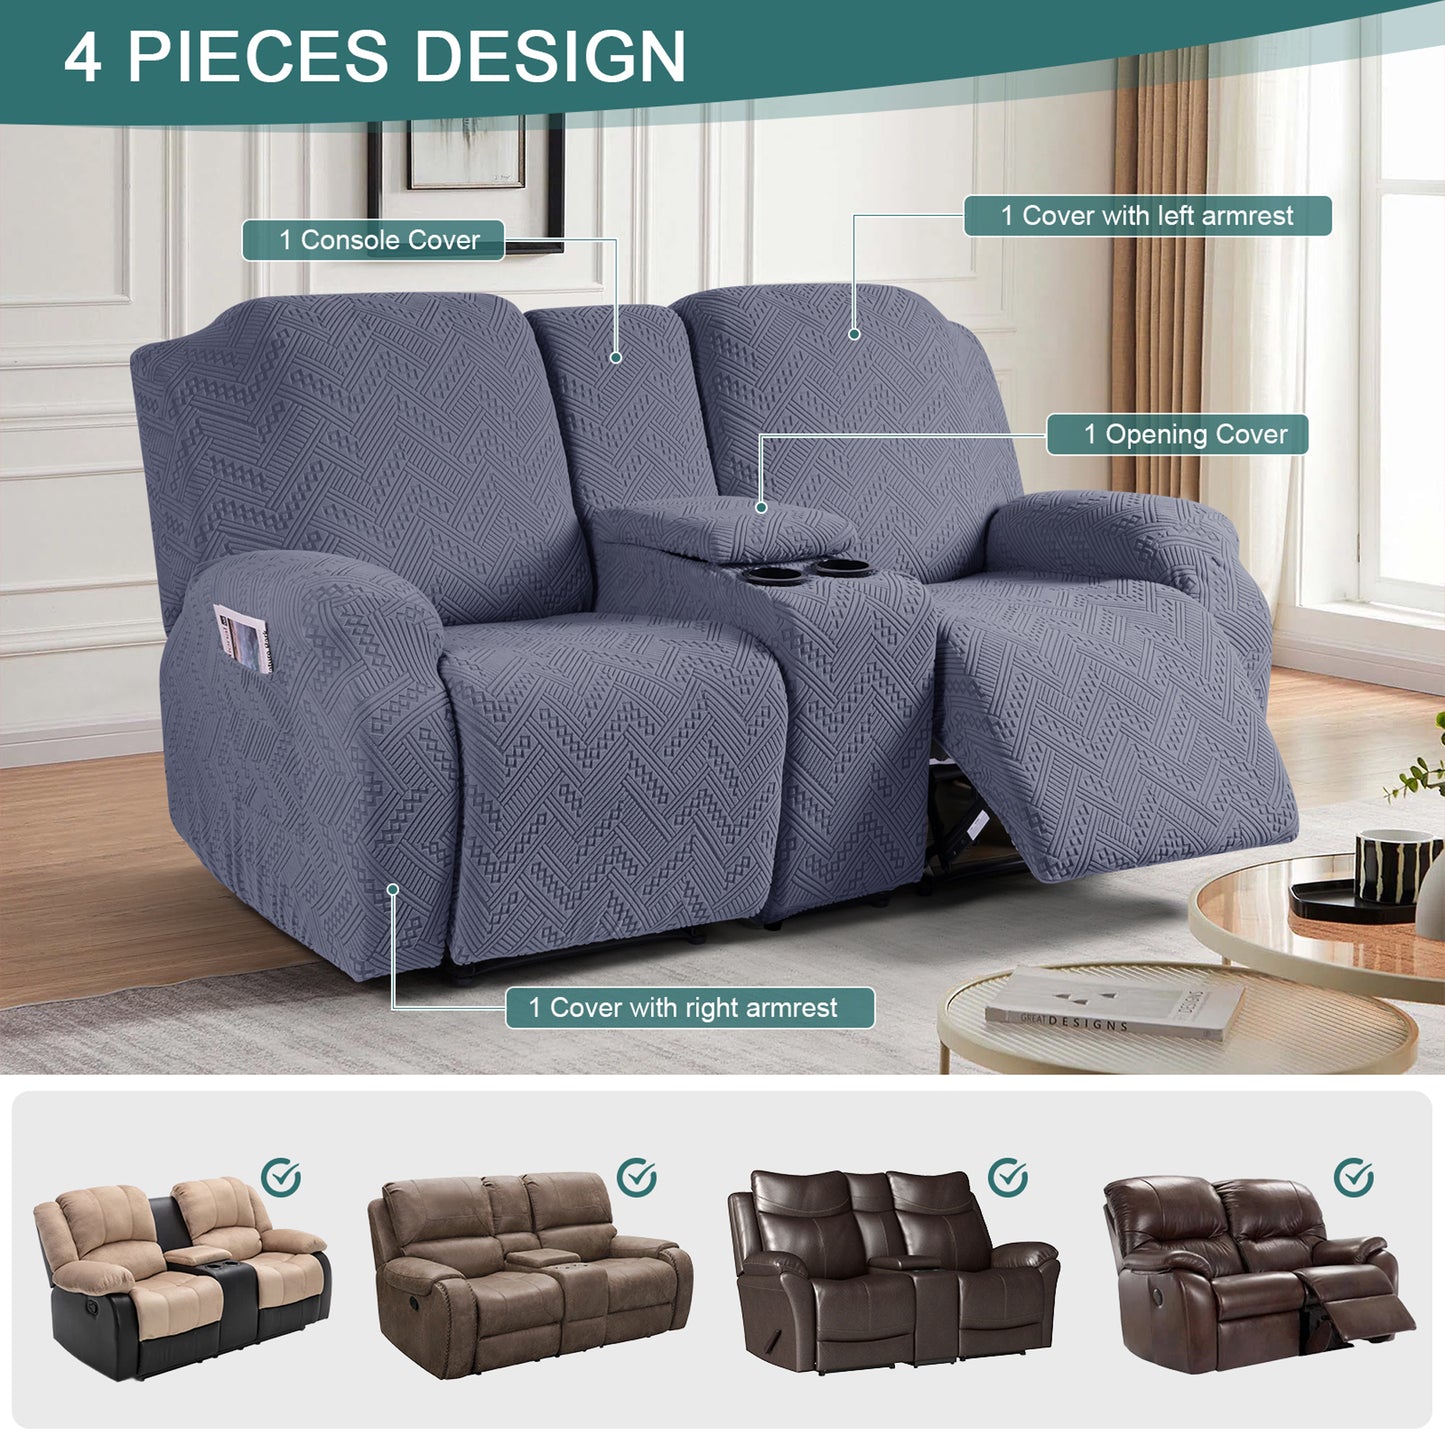 FENG LING GE 2 Seat Sofa Cover for Recliner with Console